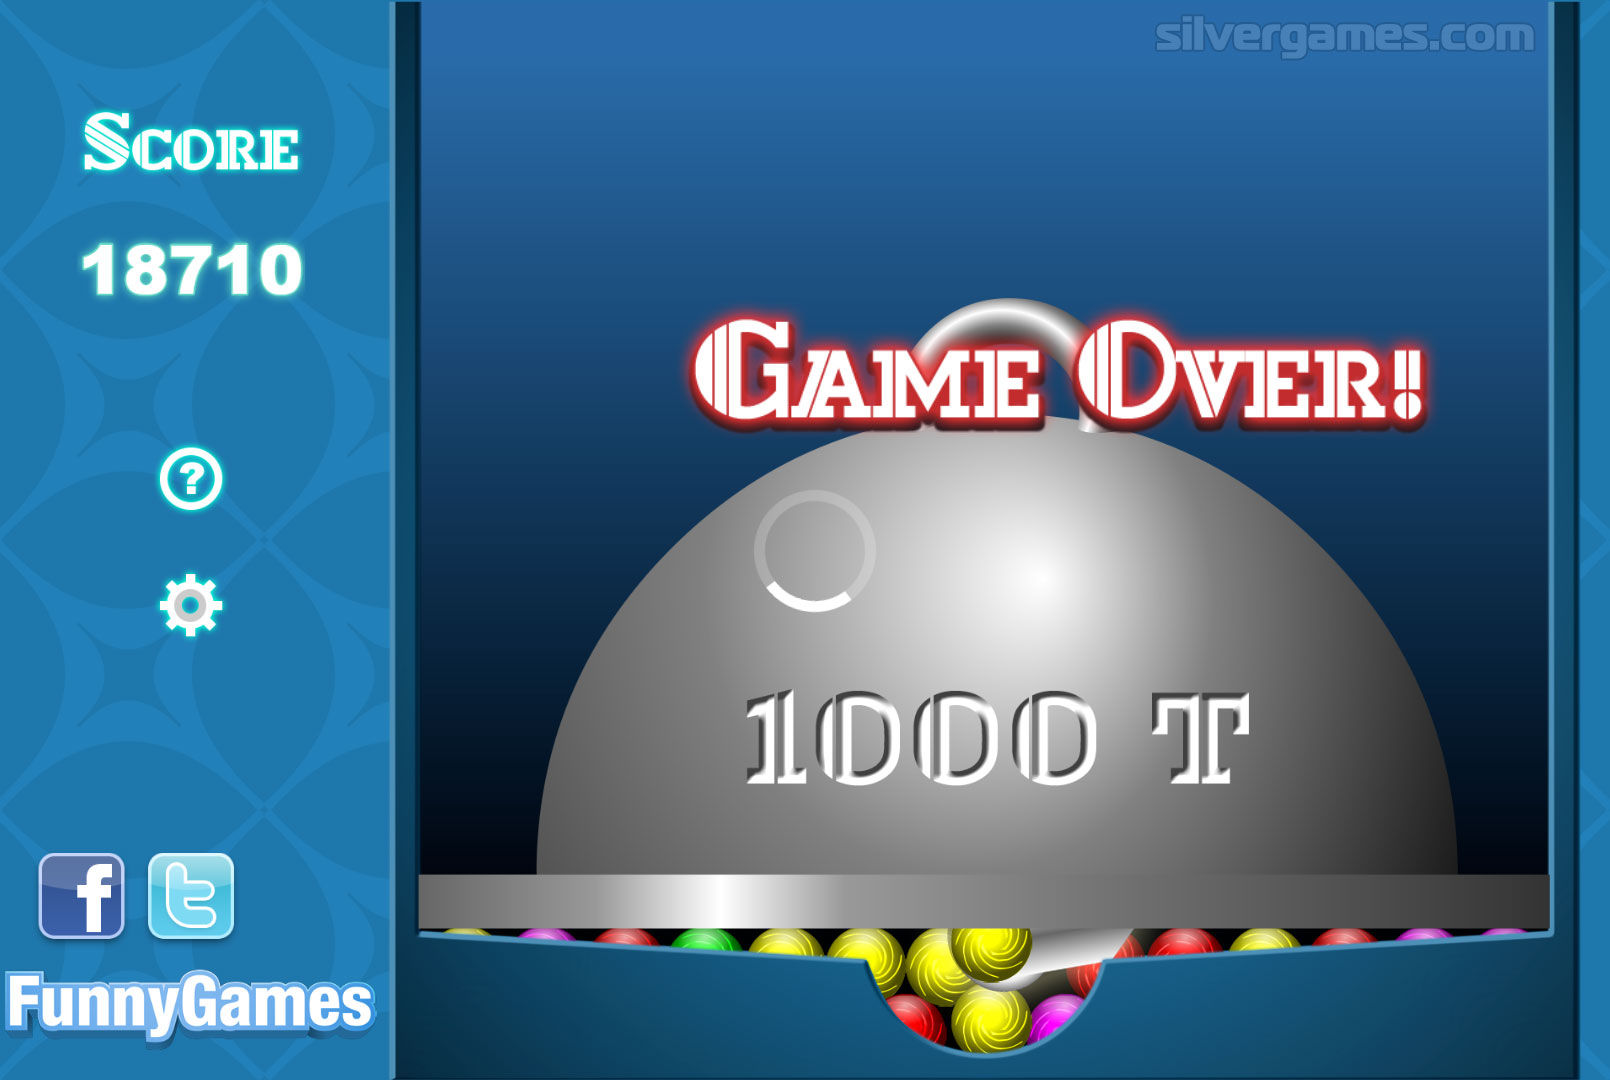 Play Bouncing Balls, 100% Free Online Game, FreeGames.org in 2023